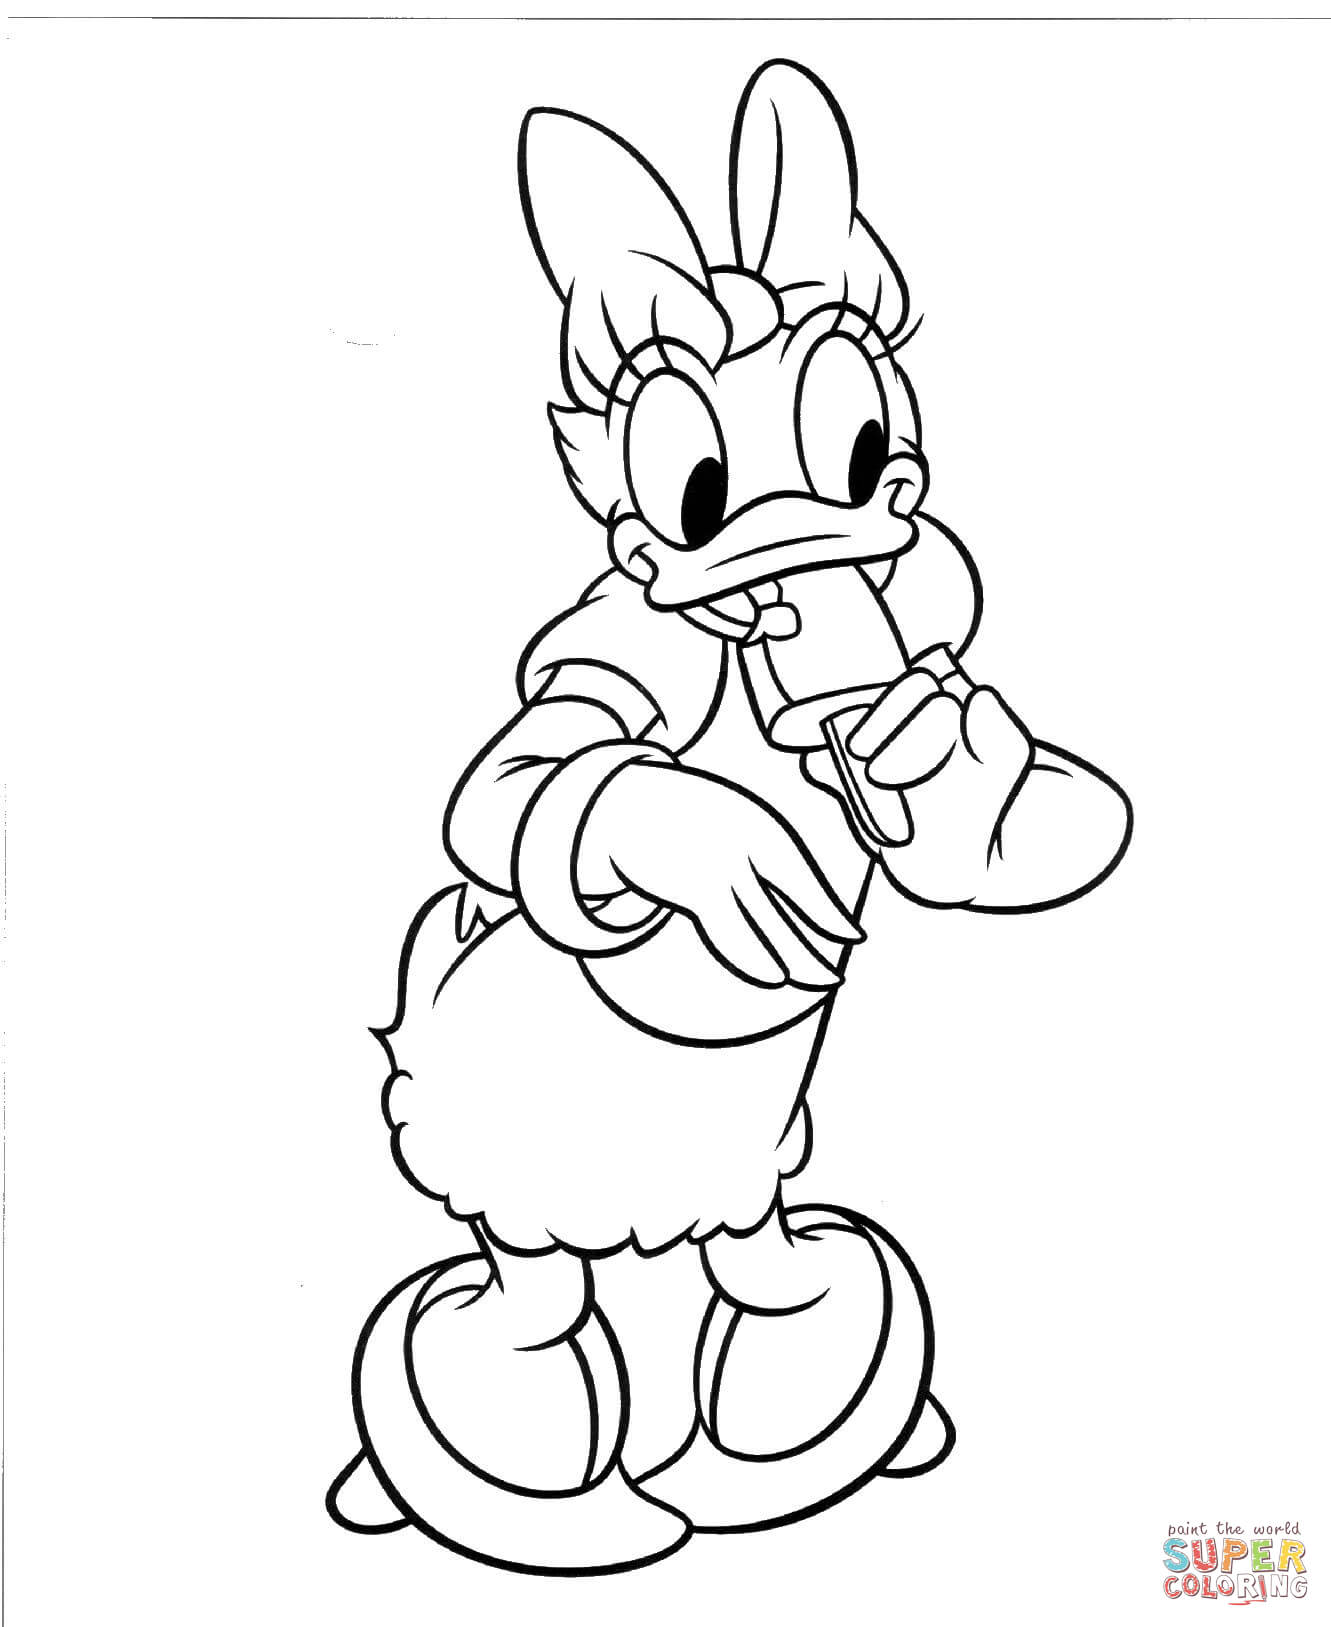 Donald Ducks Girlfriend coloring page | Free Printable Coloring Pages